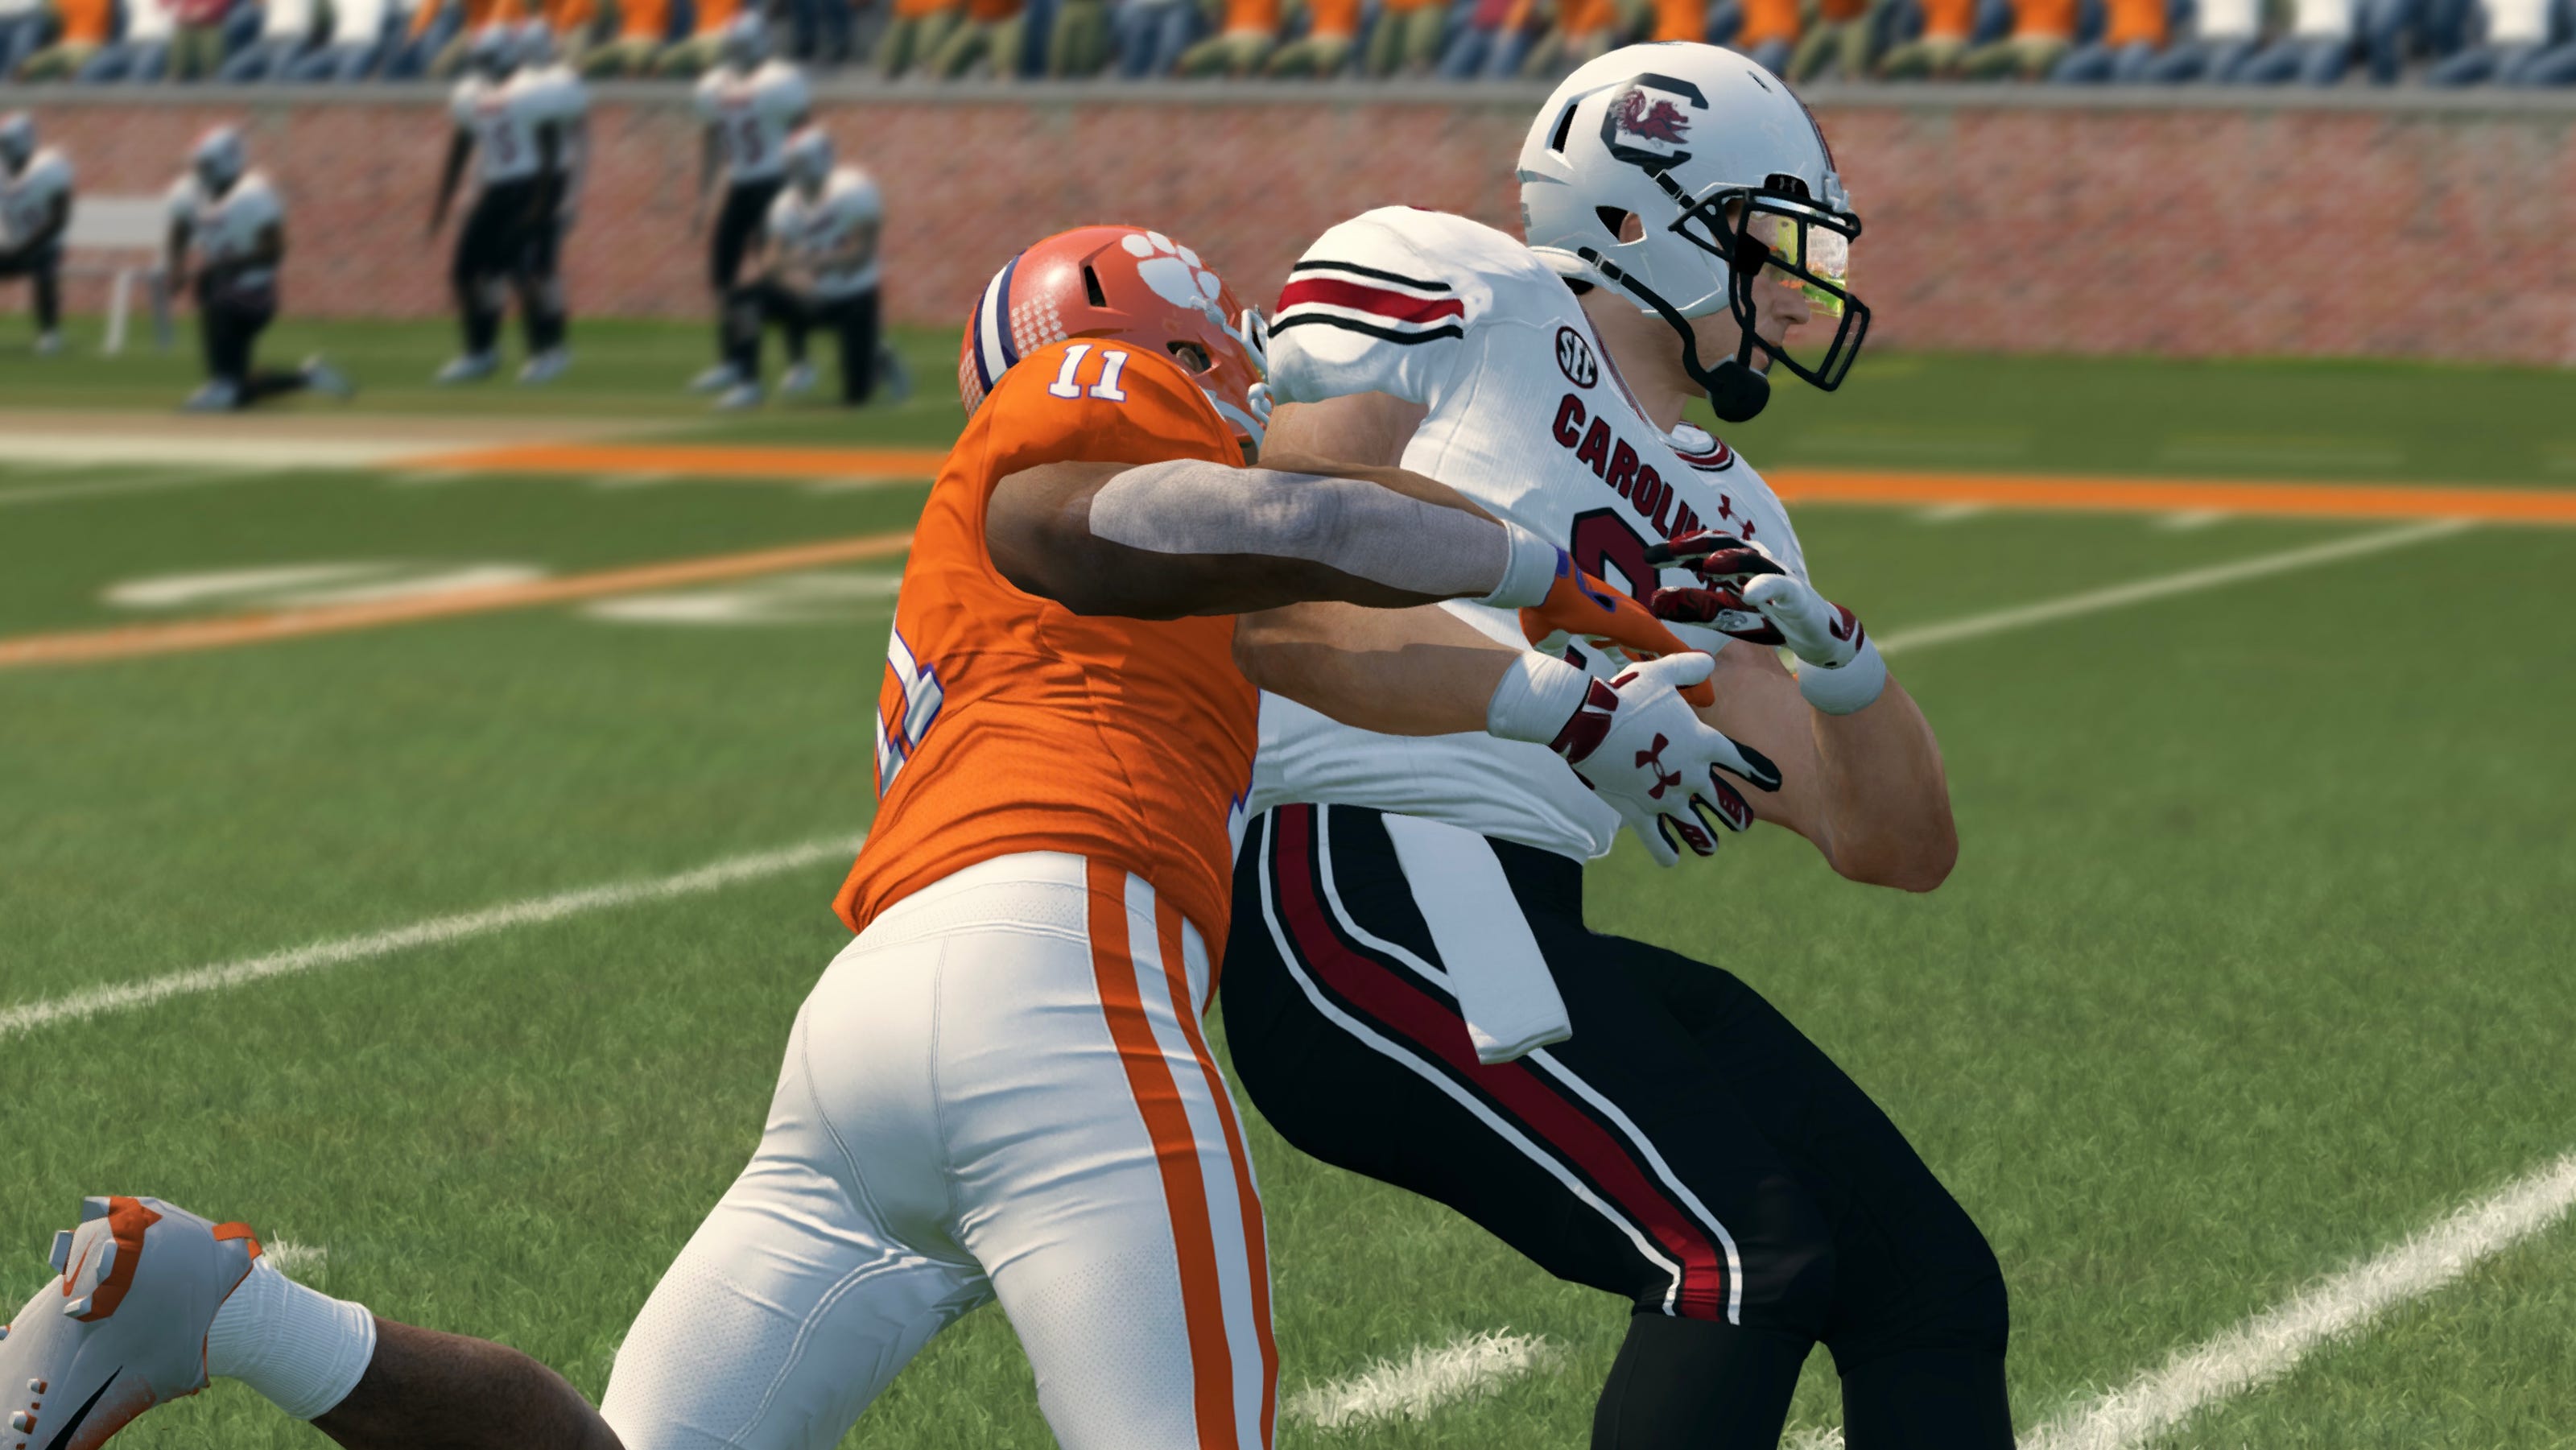 ncaa-football-14-ea-sports-game-lives-on-thanks-to-hardcore-fans